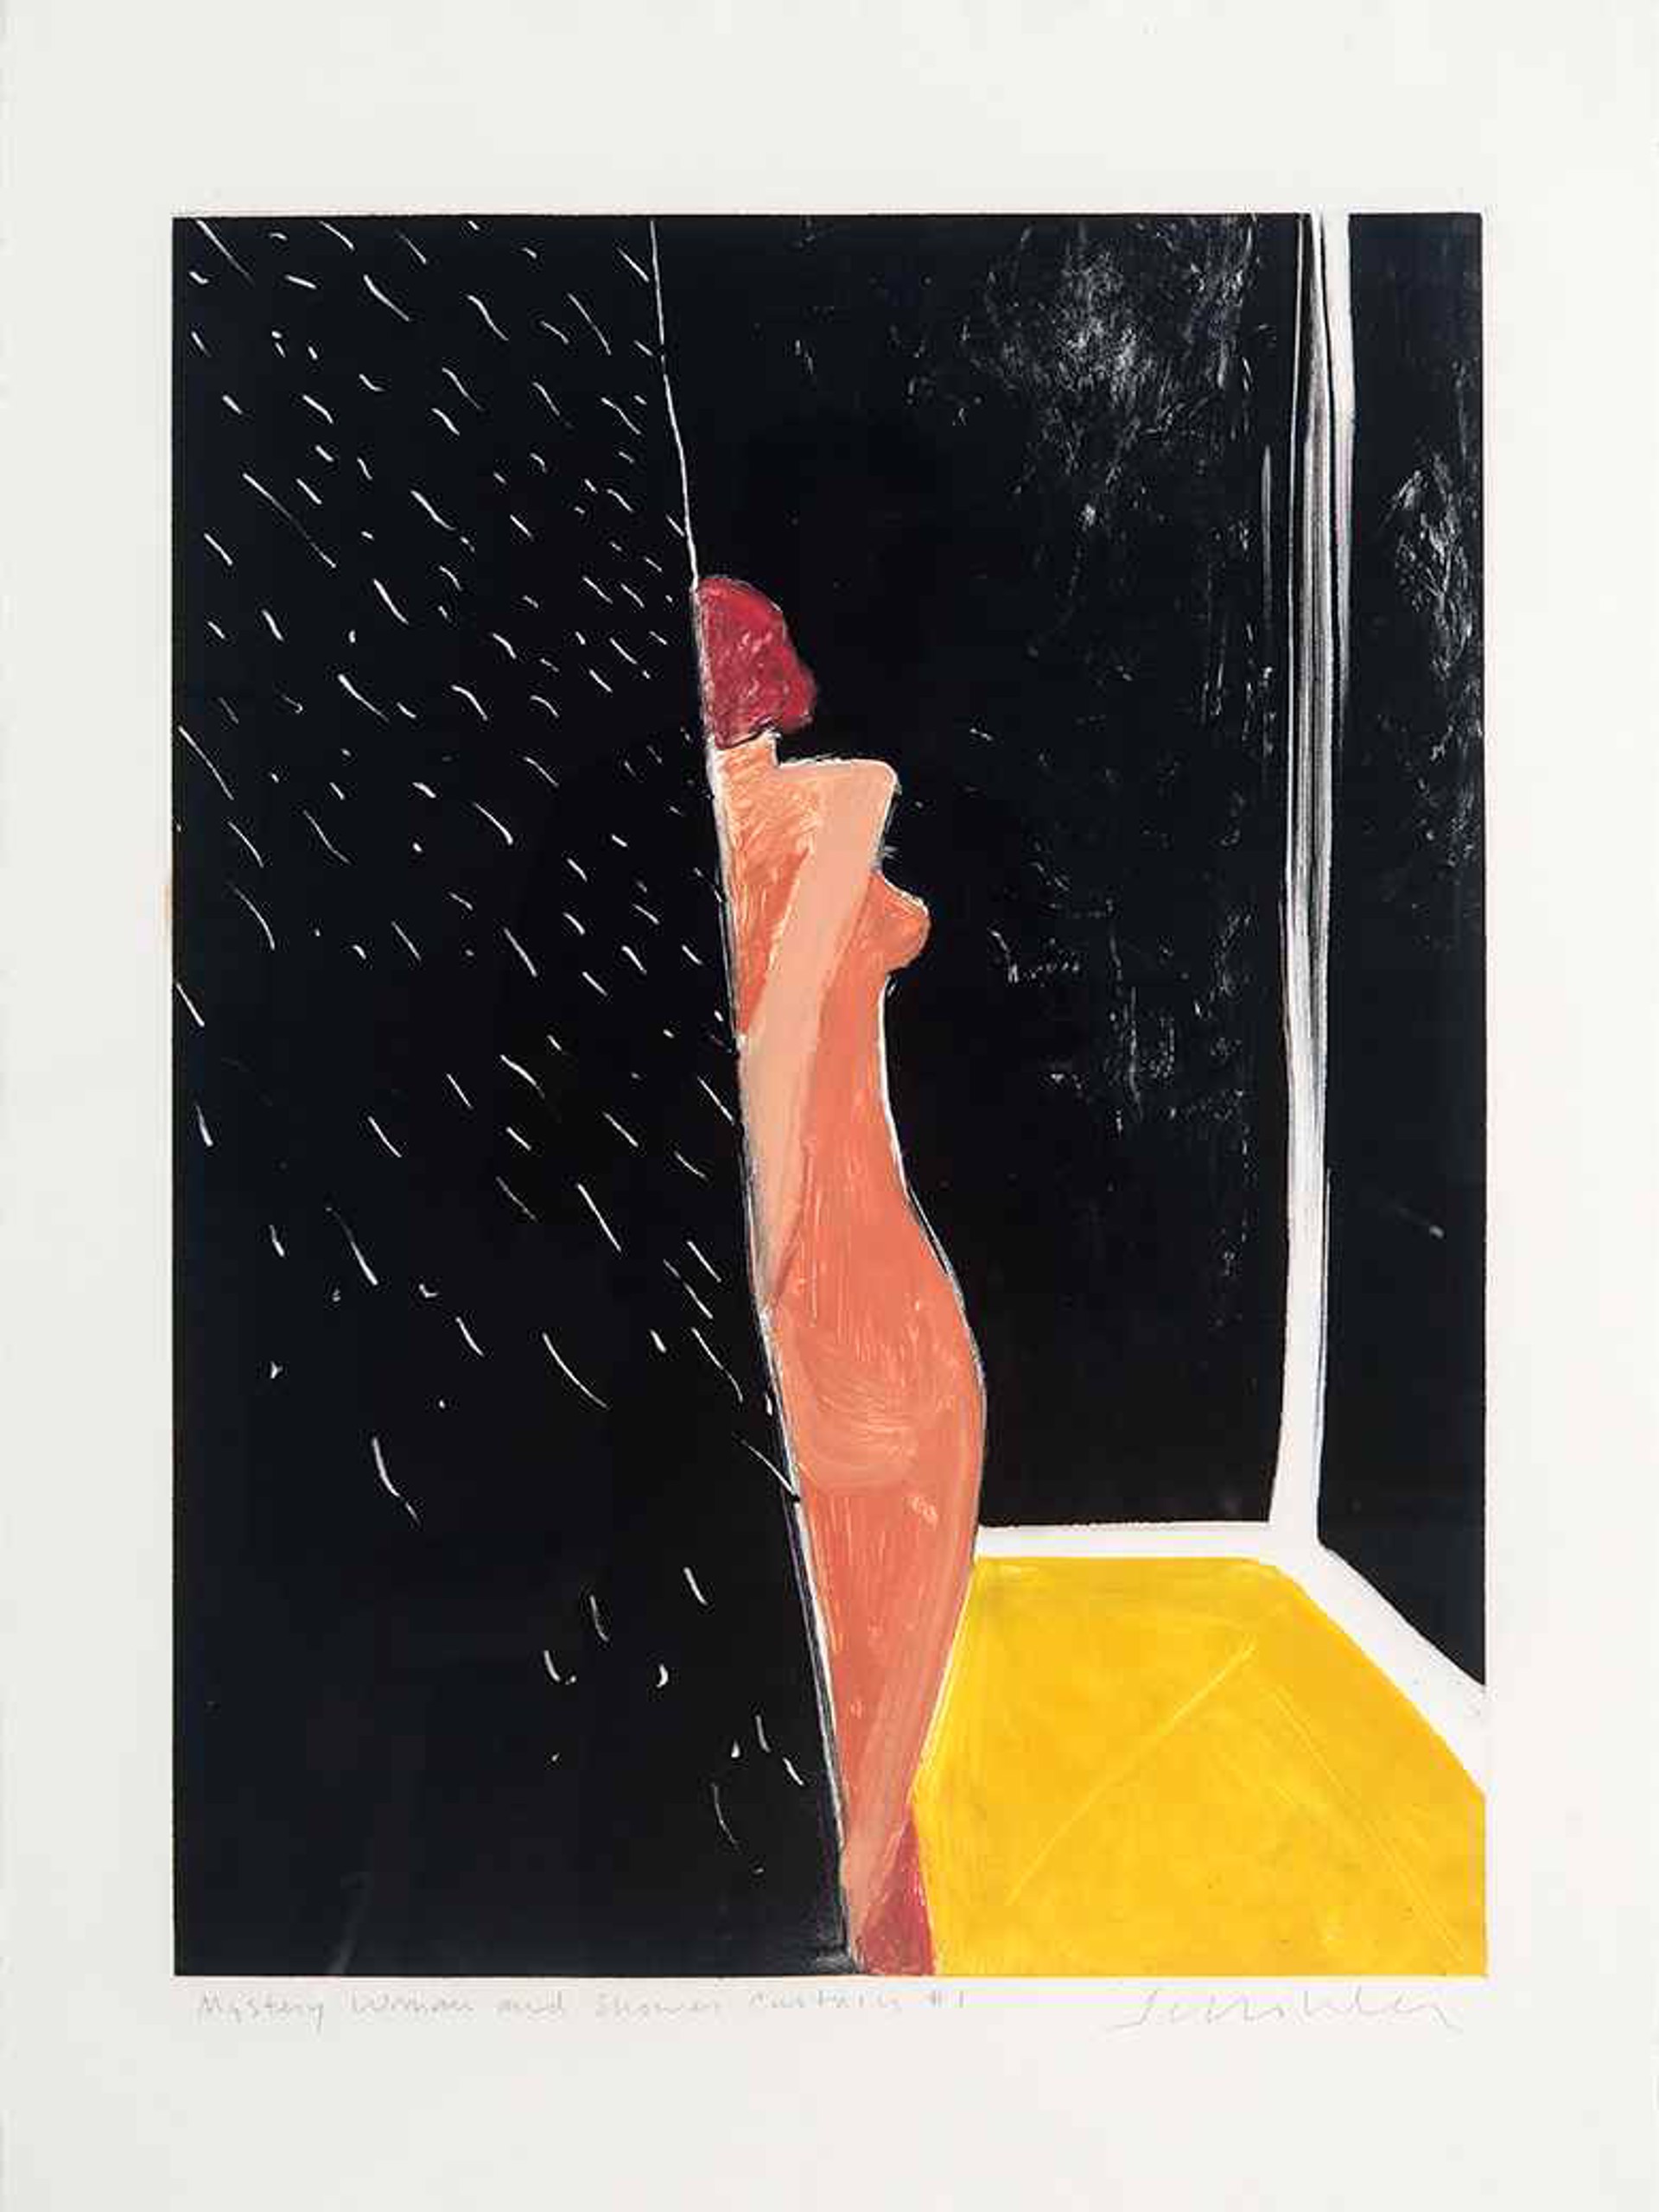 Mystery Woman and Shower Curtain No. 1 by Fritz Scholder